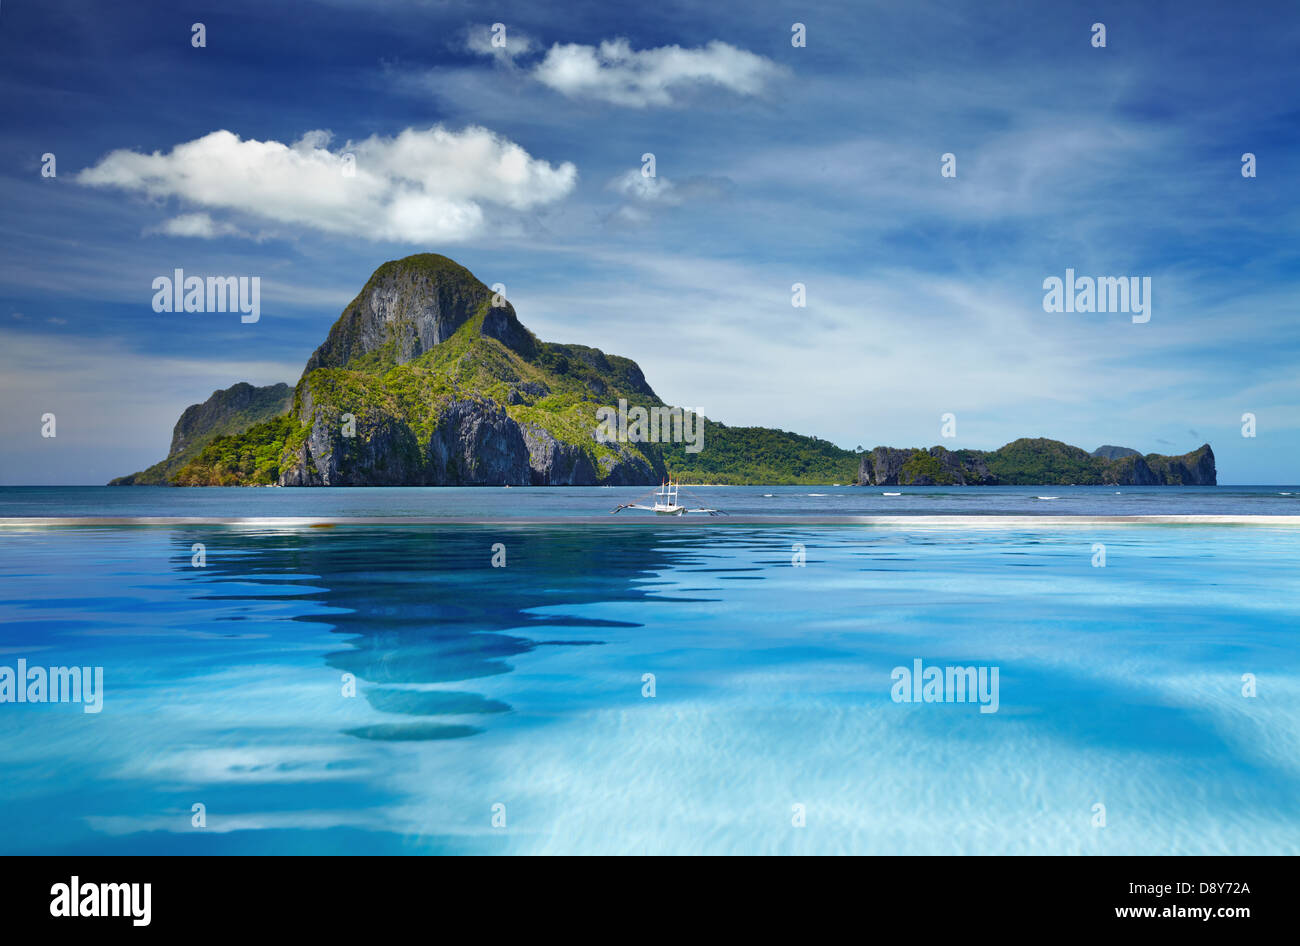 Landscape with swimming pool and Cadlao island, El Nido, Philippines Stock Photo